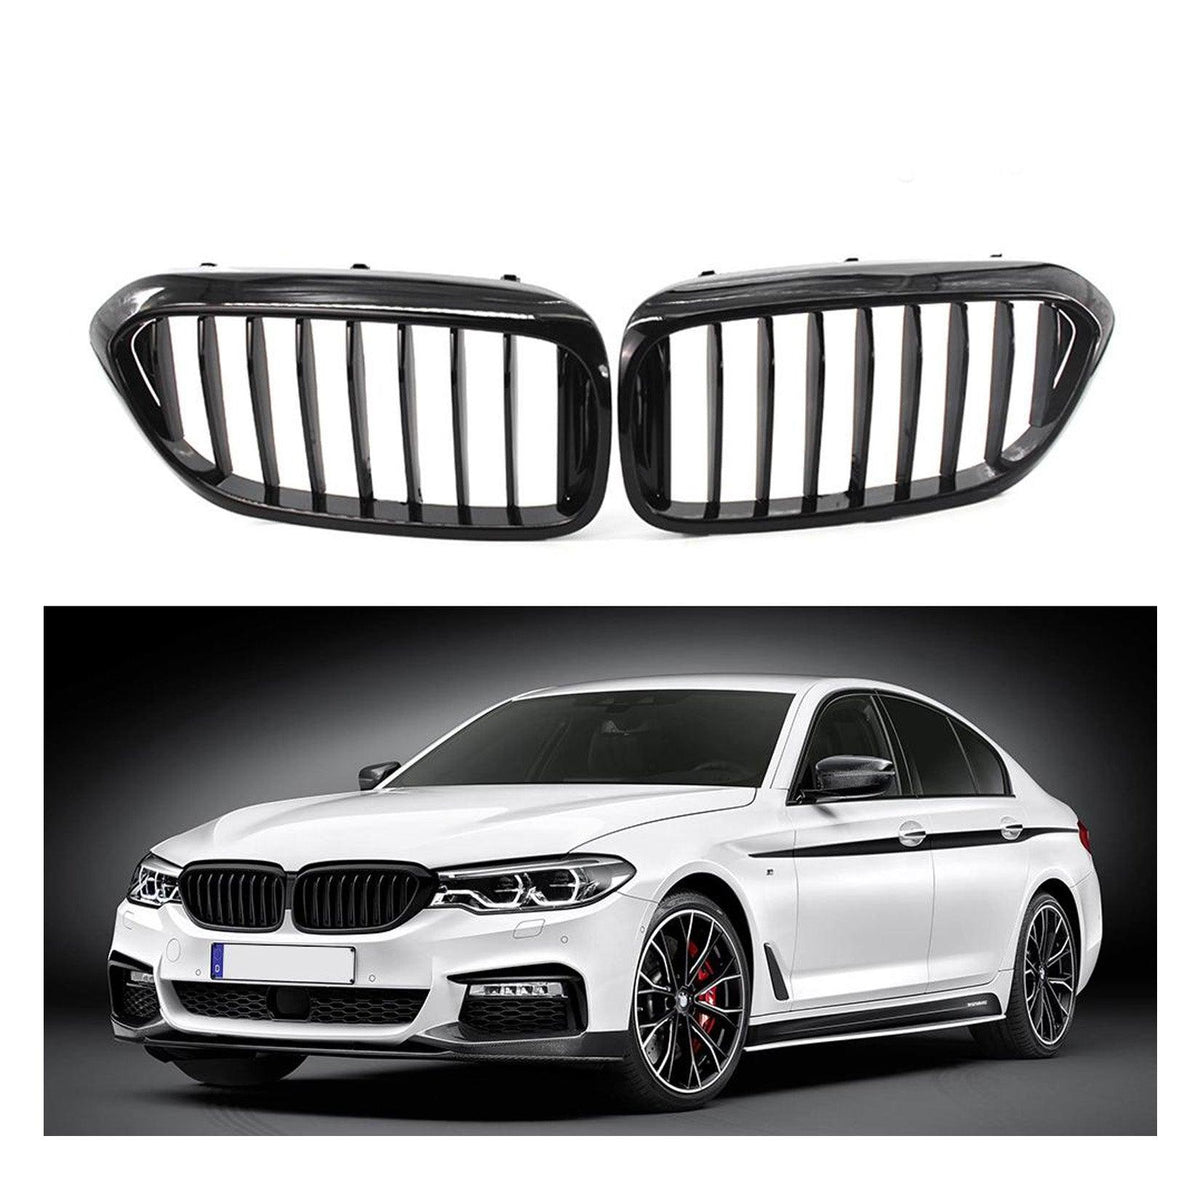 BMW 5 SERIES G30/G31 2017-2020 M5 STYLE SOLID SLAT UPGRADE FRONT GRILL IN GLOSS BLACK - RisperStyling